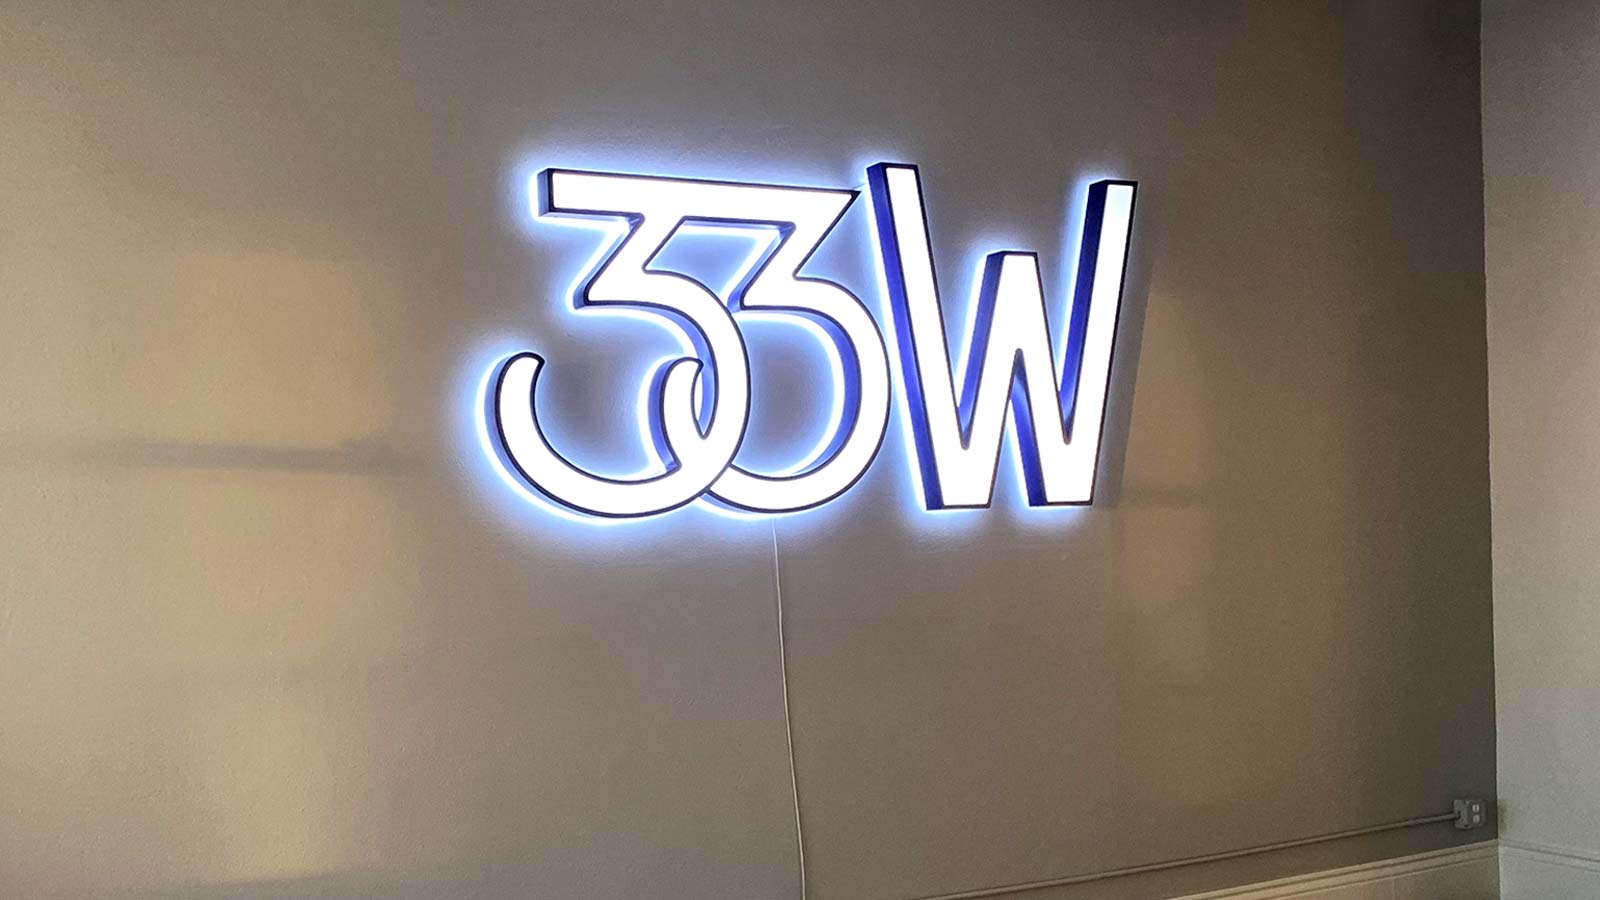 33 and west backlit interior sign installed on the wall